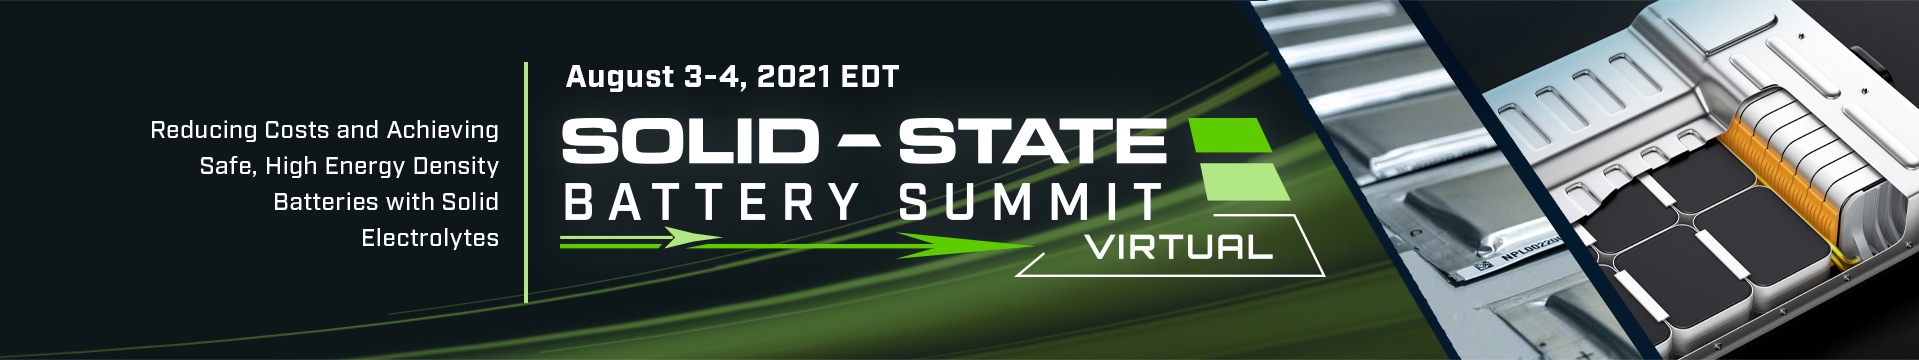 Solid-State Batteries Summit Banner Image